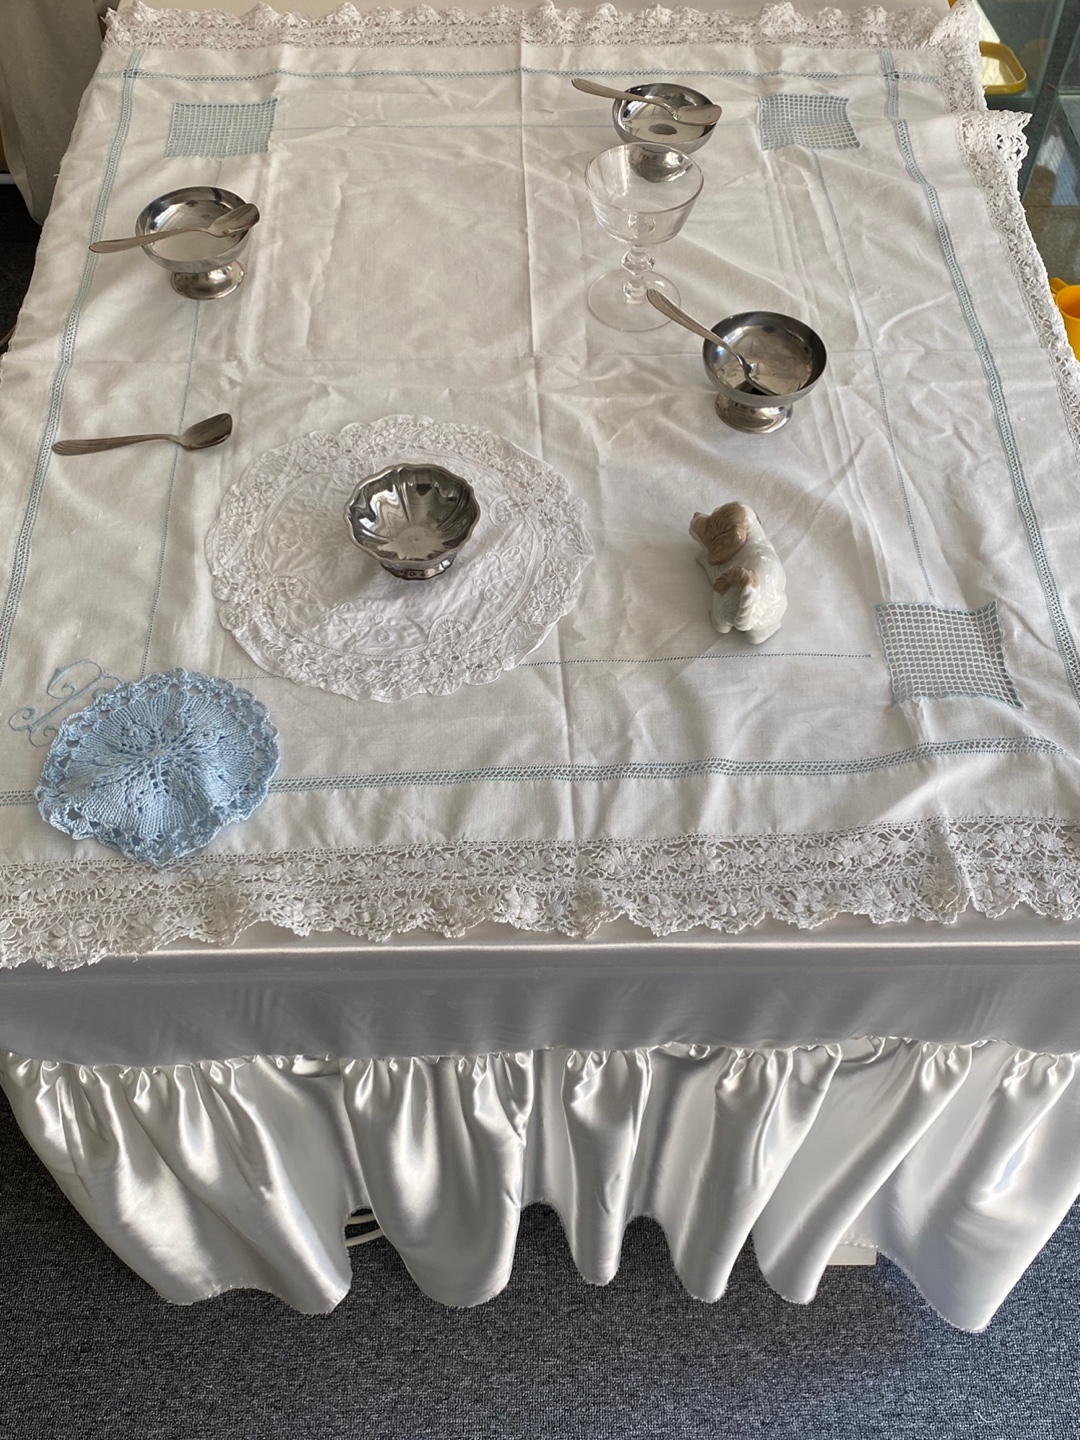 Vintage Tea Tablecloth In White And Pale Blue. Hand Embroidery